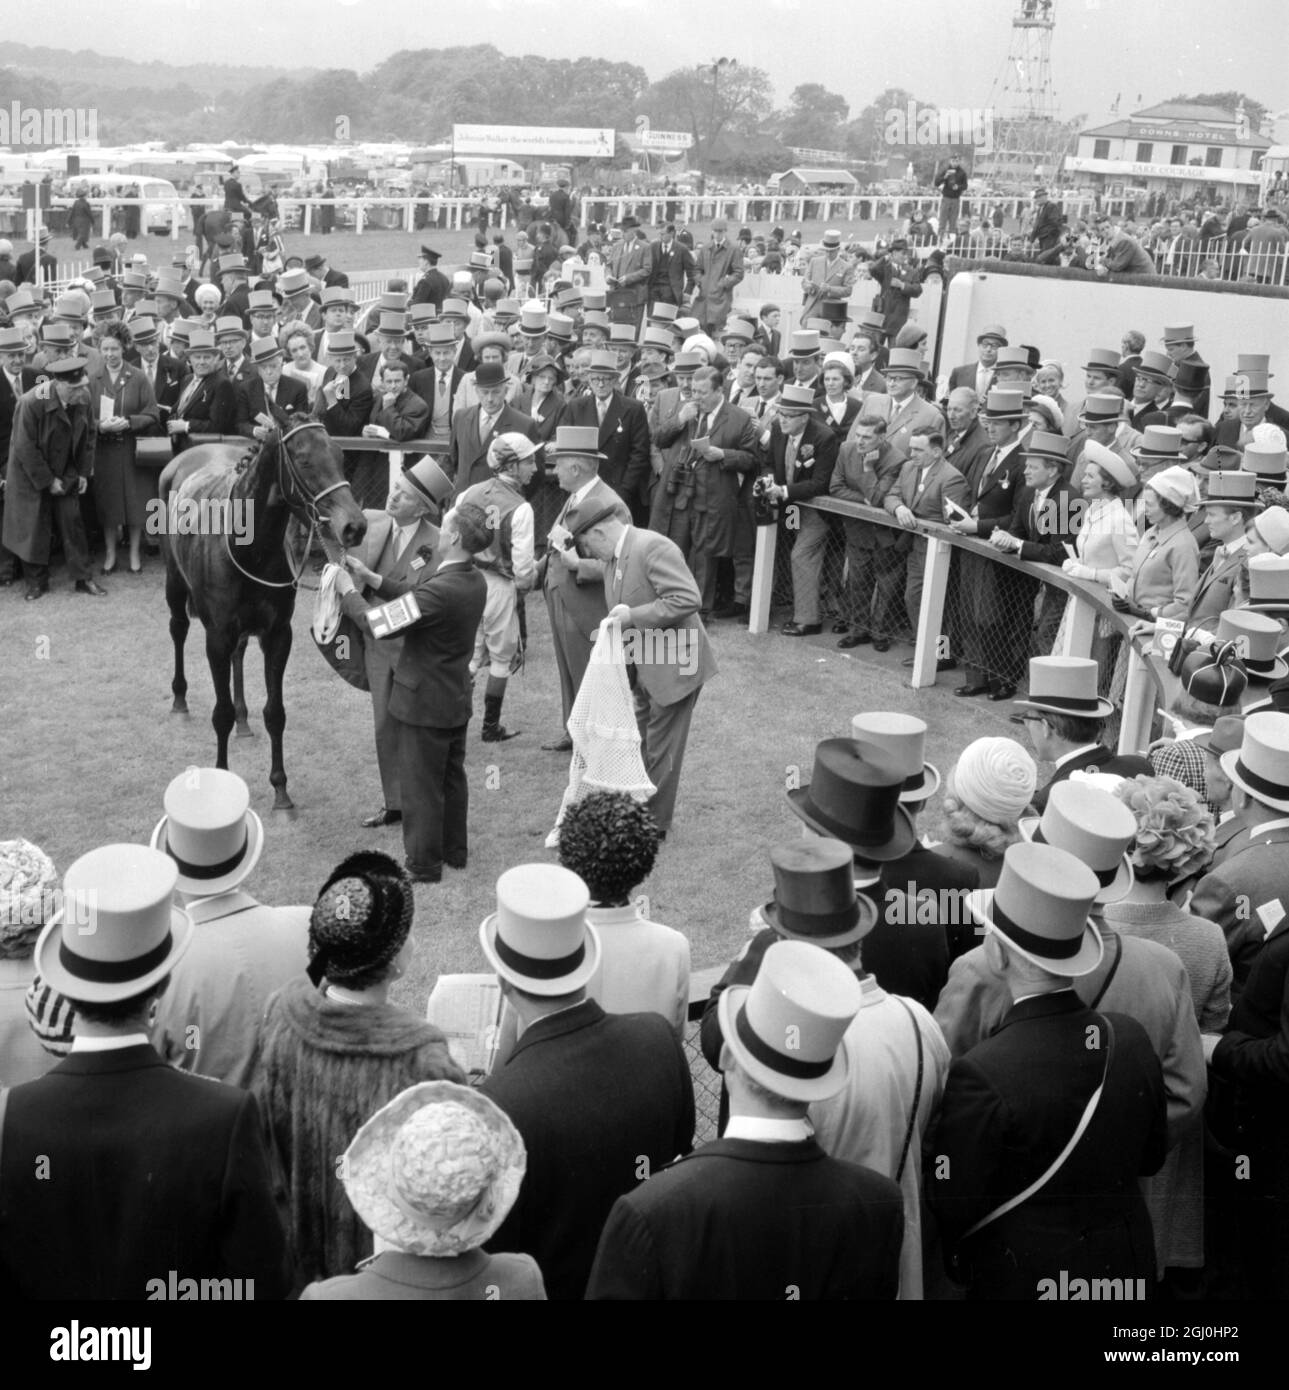 Epsom, surrey, England : financier Mr. Charles Clore ( topper, profile, right ) Congressional jockey, Lester Piggott at Epsom today, aften he won the Oaks Stakes up on Mr. Clore’s course, Valoris ( left ), being patted by Irish trainer, top hatted, Vincent O’Brien. Valoris finished two and a half lengths in front of the 6 to 1 shot Berkeley Springs, owned by American banker, Paul Mellon, with Geoff Lewis in the saddle . Third, three lengths further away came Wickham-Boynton’s Varinia, an unconsidered outsider ridden by Stan Clayton at the odds of 100 to 7. The race was a consolation for O’Brie Stock Photo